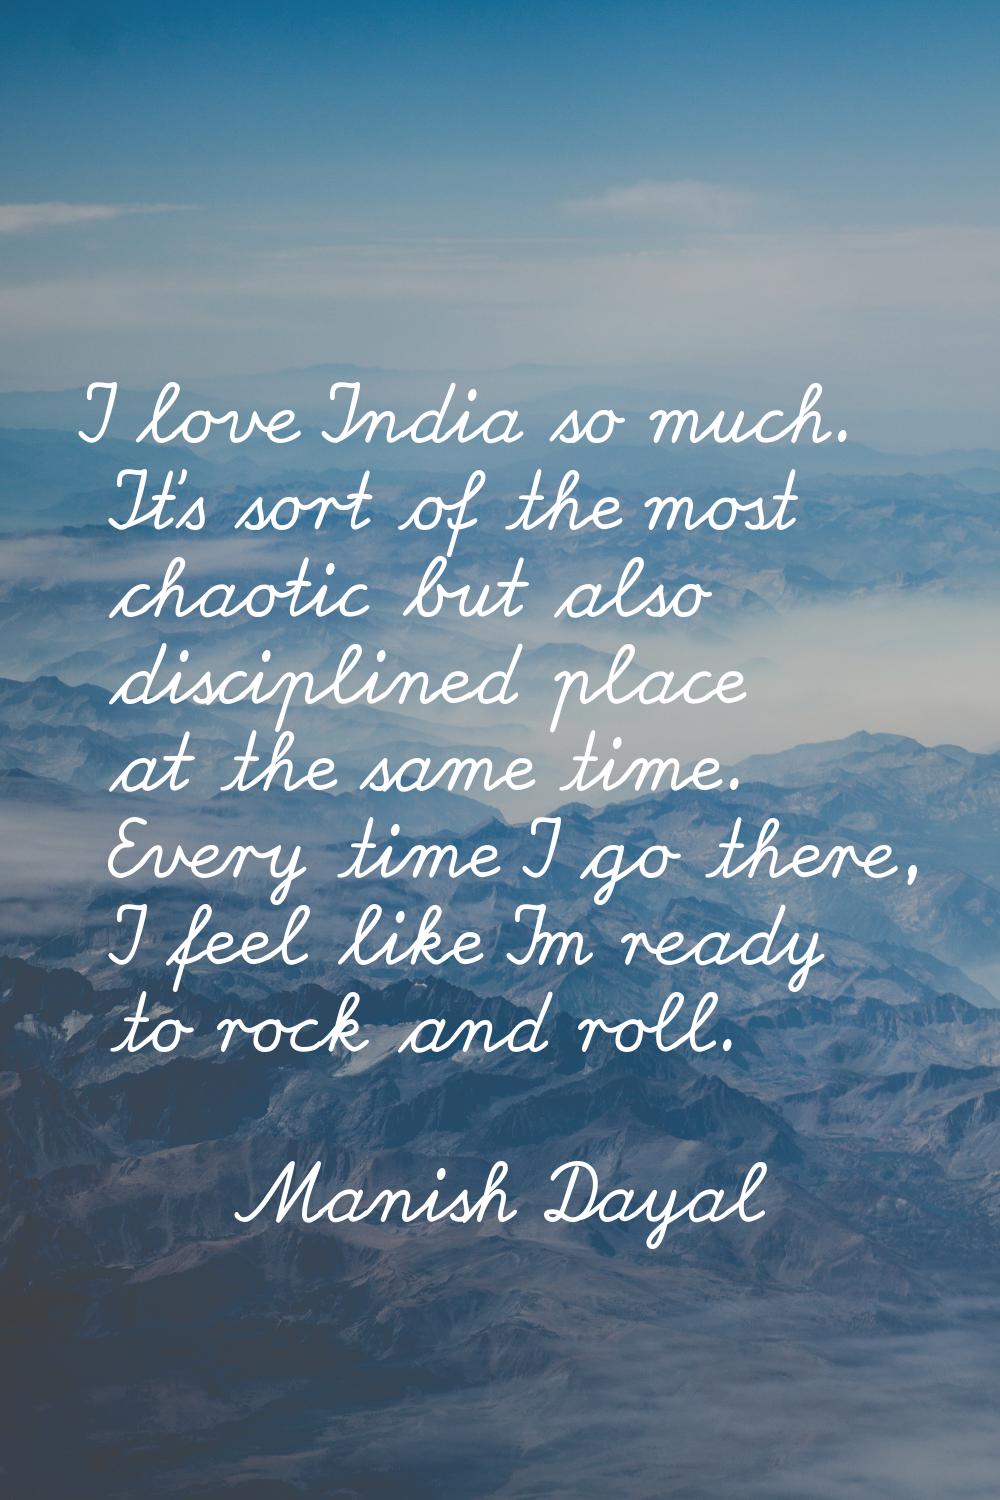 I love India so much. It's sort of the most chaotic but also disciplined place at the same time. Ev